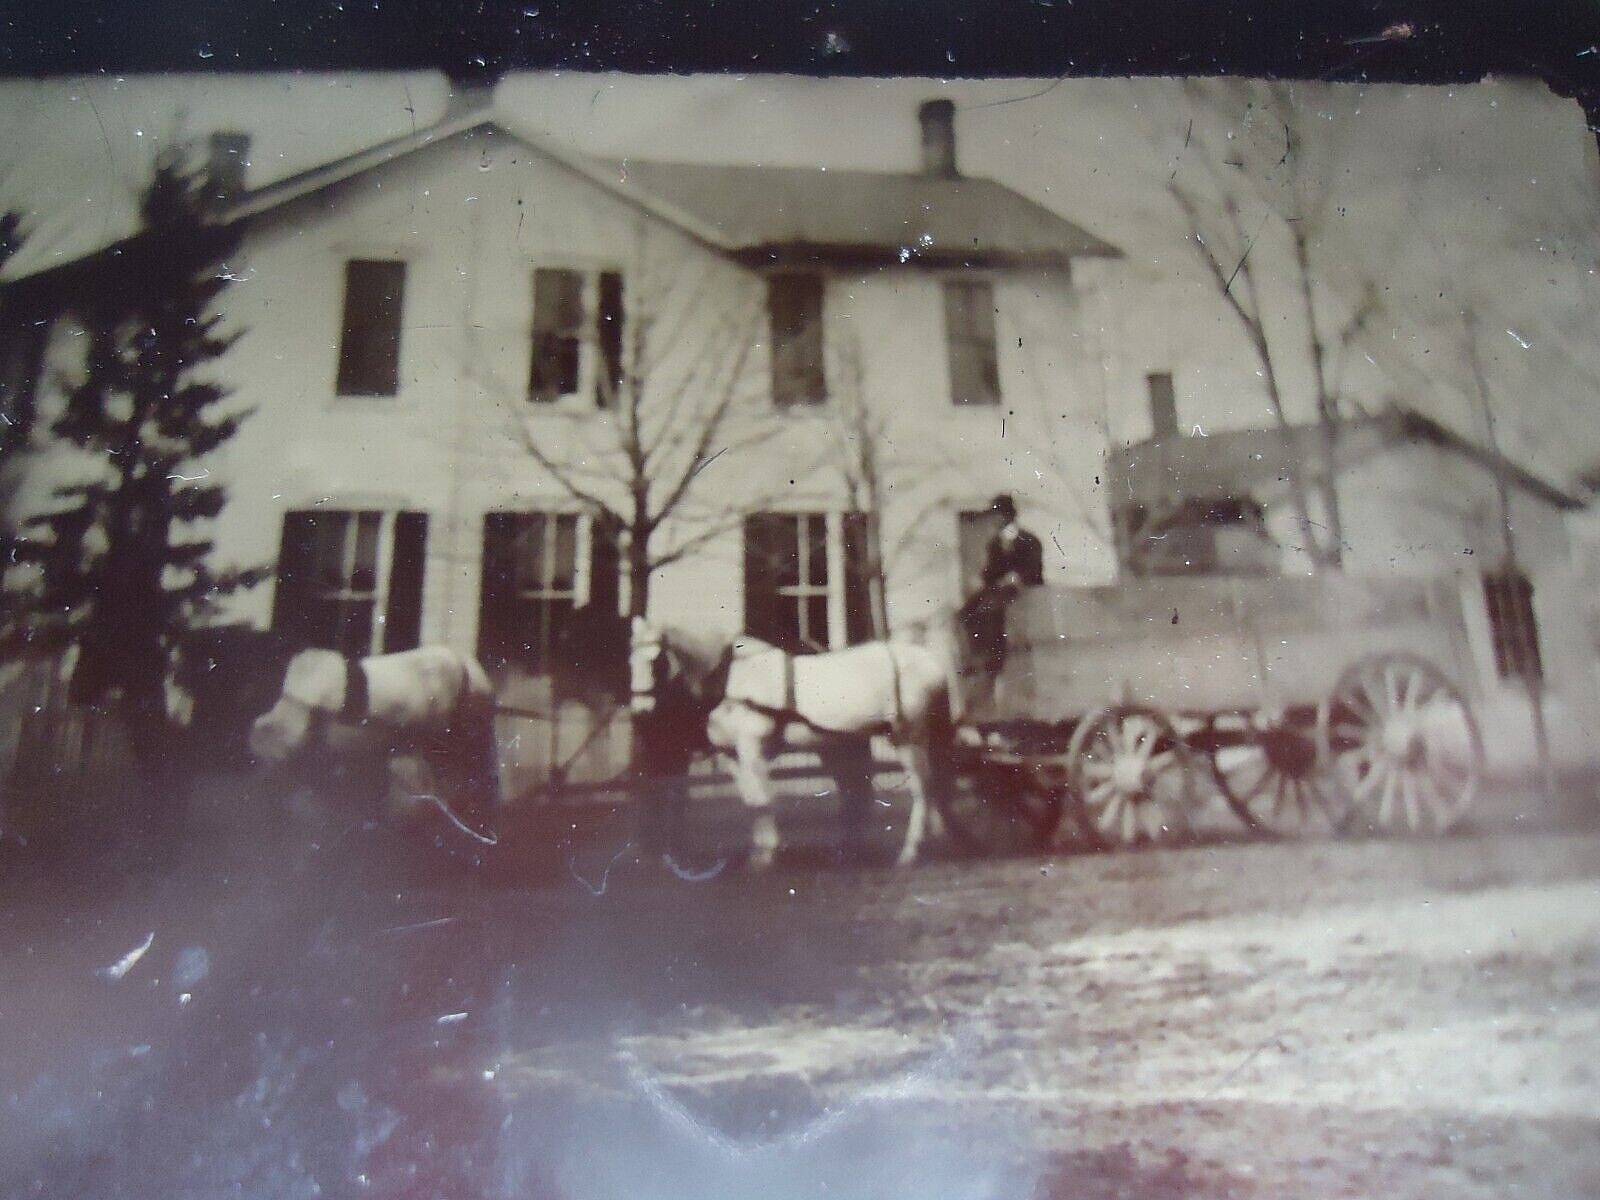 6th, P. Tintype OUTDOOR VIEW, Large Farm House MAN in HORSE DRAWN WAGON, Barn .